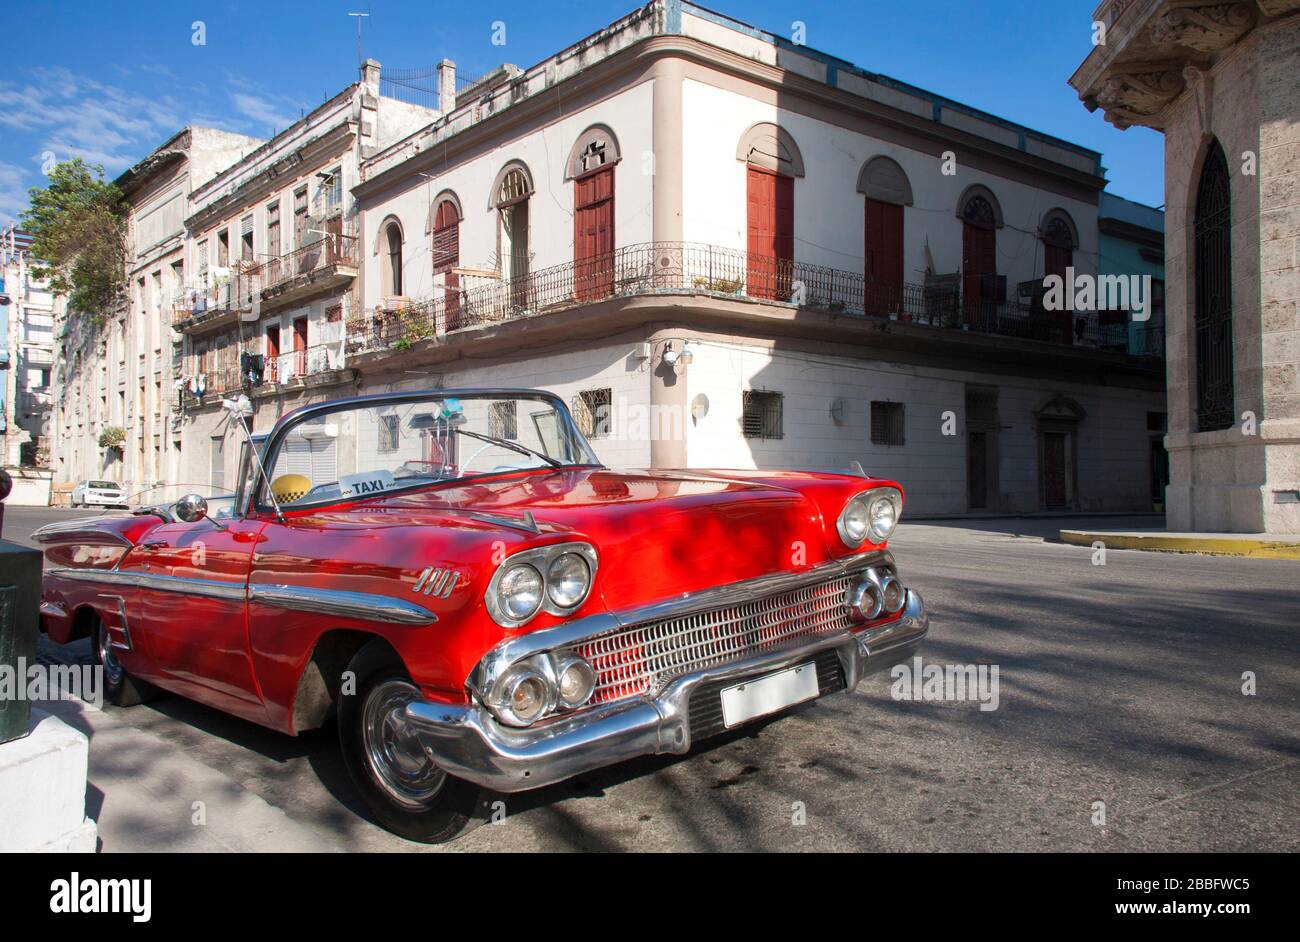 HAVANA, CUBA - MARCH 29, 2017: Beautiful red convertible 50s American car parked on the street near to the Capitol. Havana, Cuba. Travels and tourism. Stock Photo